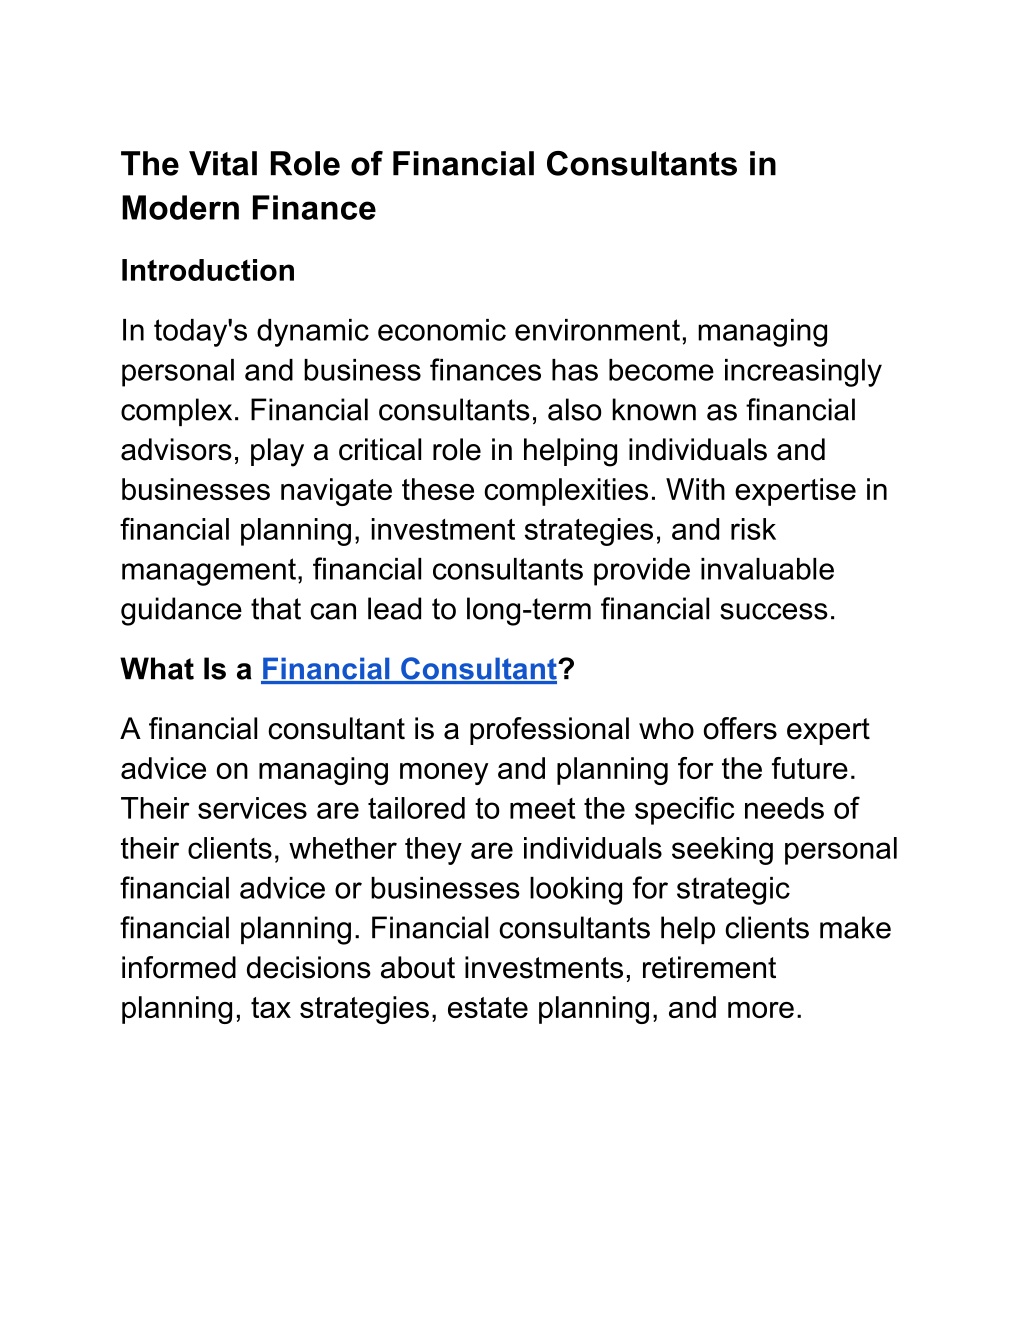 the vital role of financial consultants in modern l.w